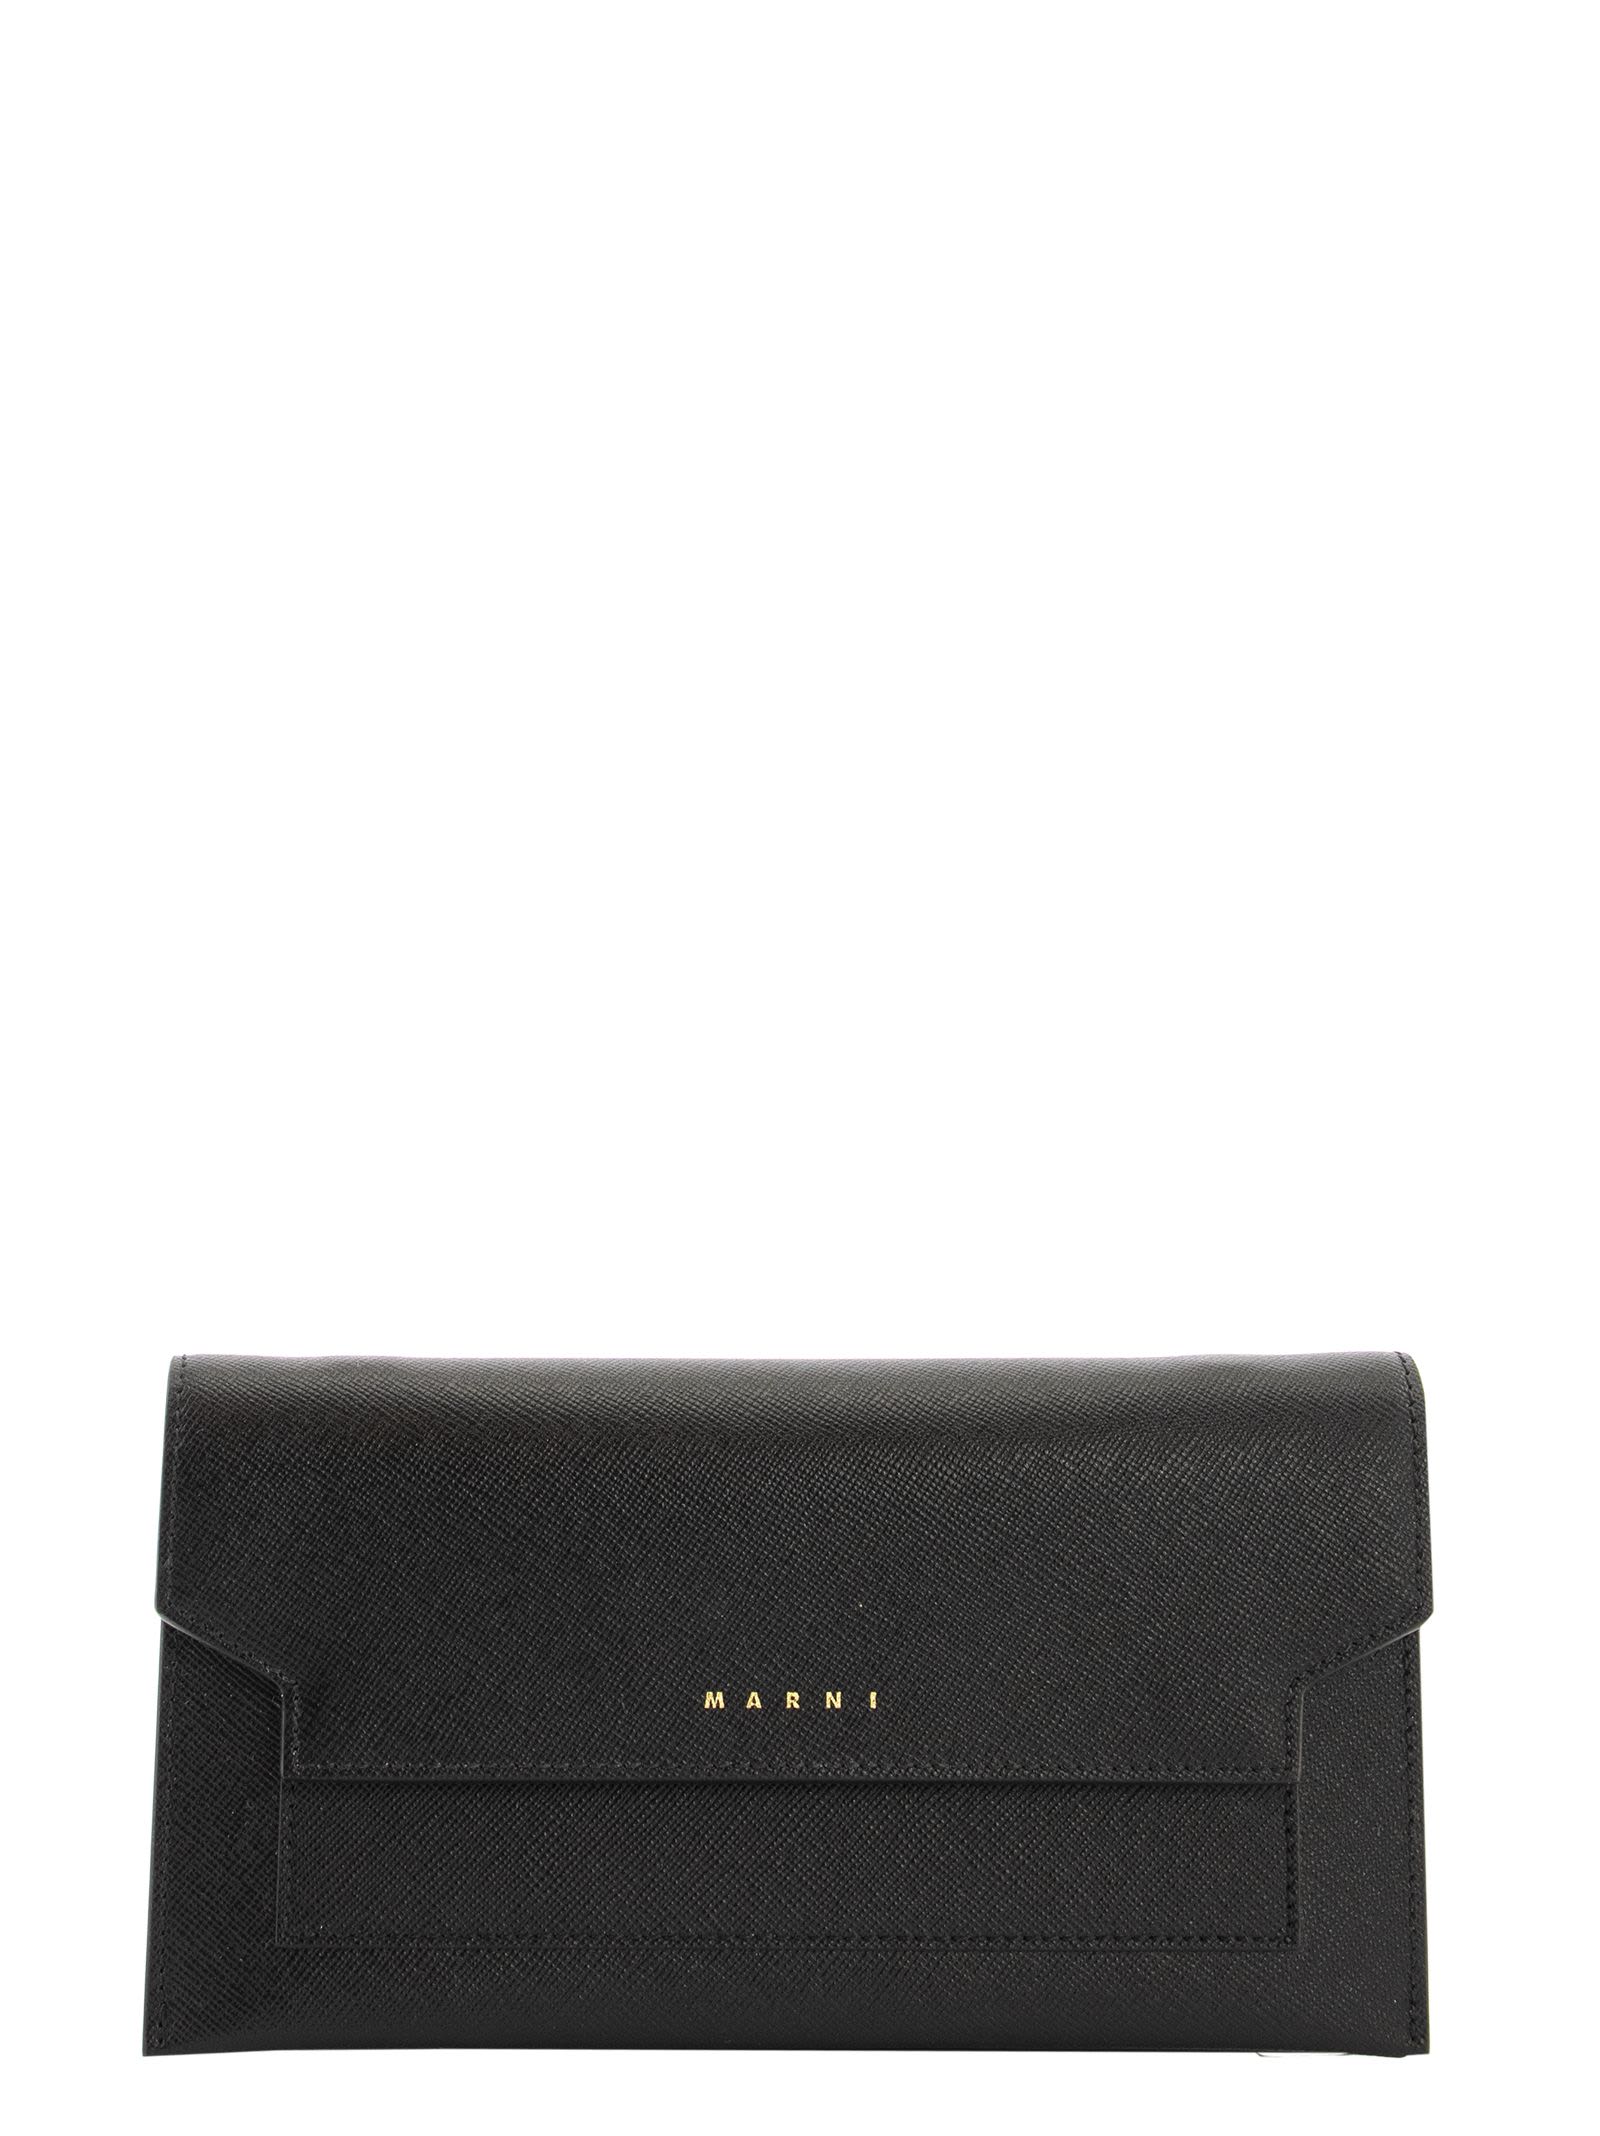 MARNI BELLOWS WALLET IN BLACK SAFFIANO LEATHER,11272879